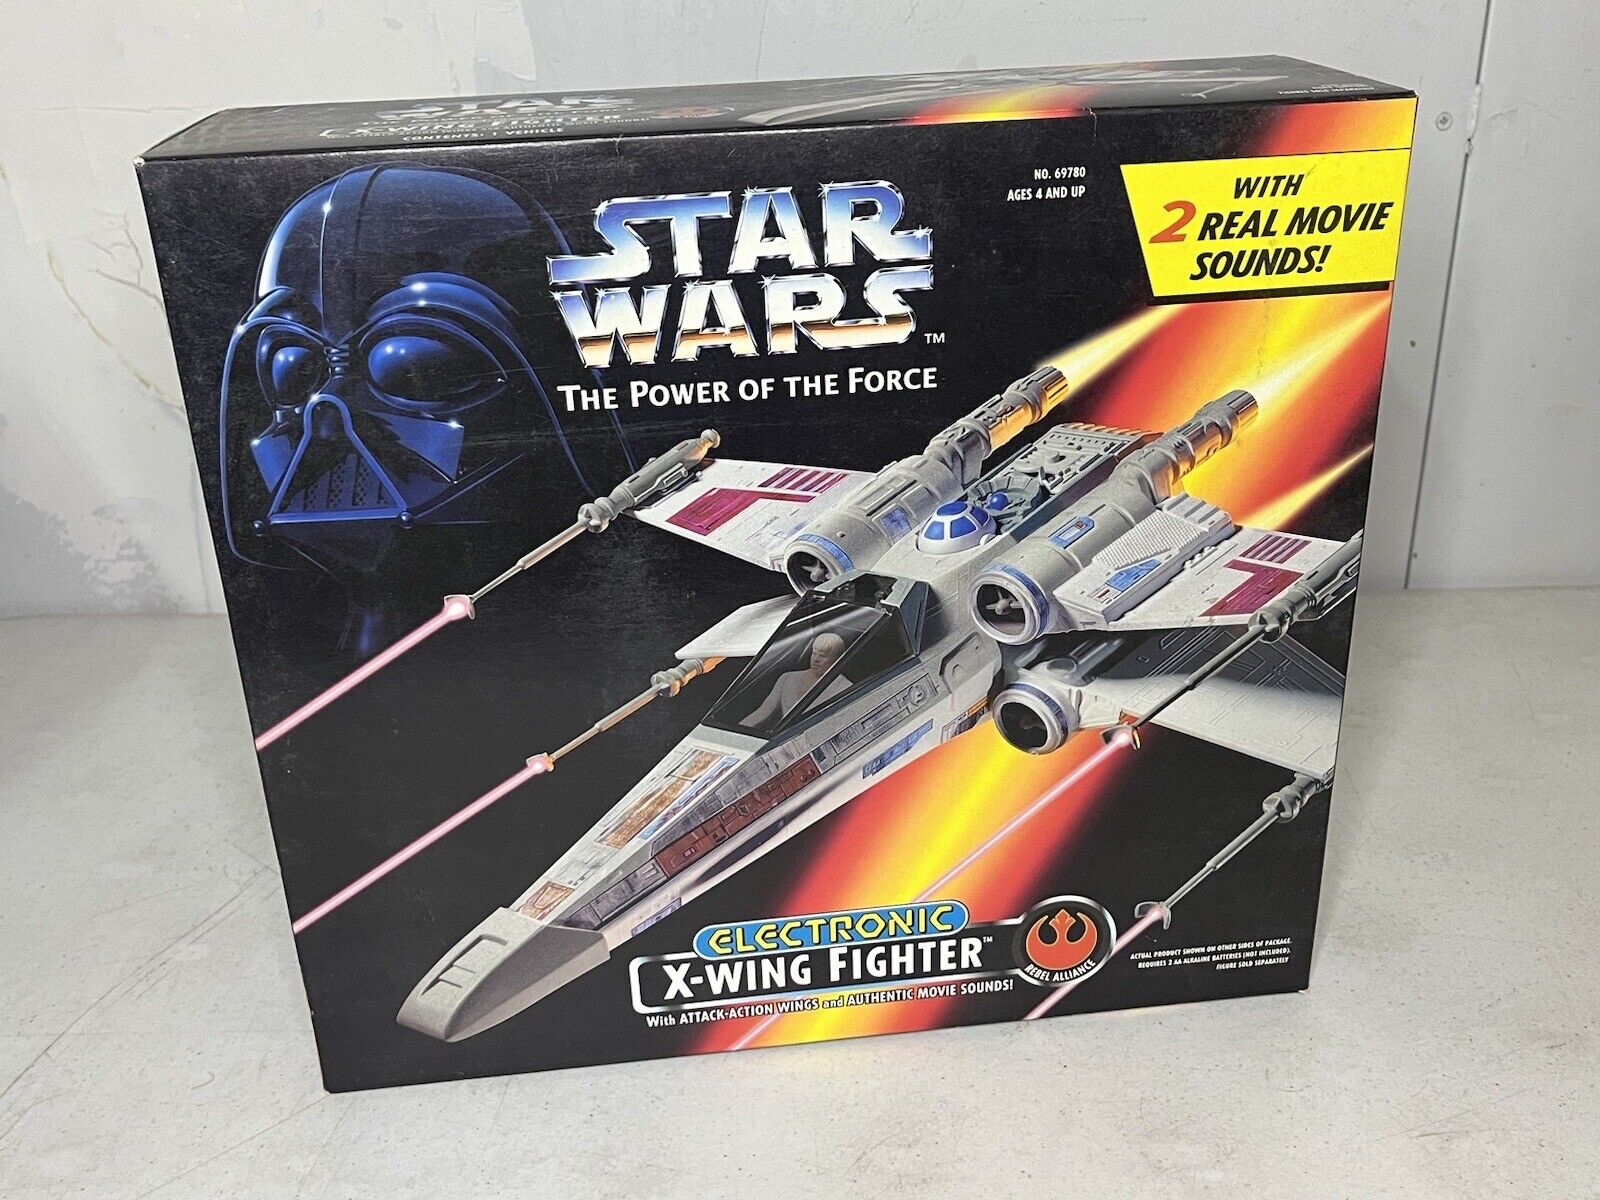 1995 Star Wars Power Of The Force Electronic X-Wing Fighter - NOS Factory Sealed